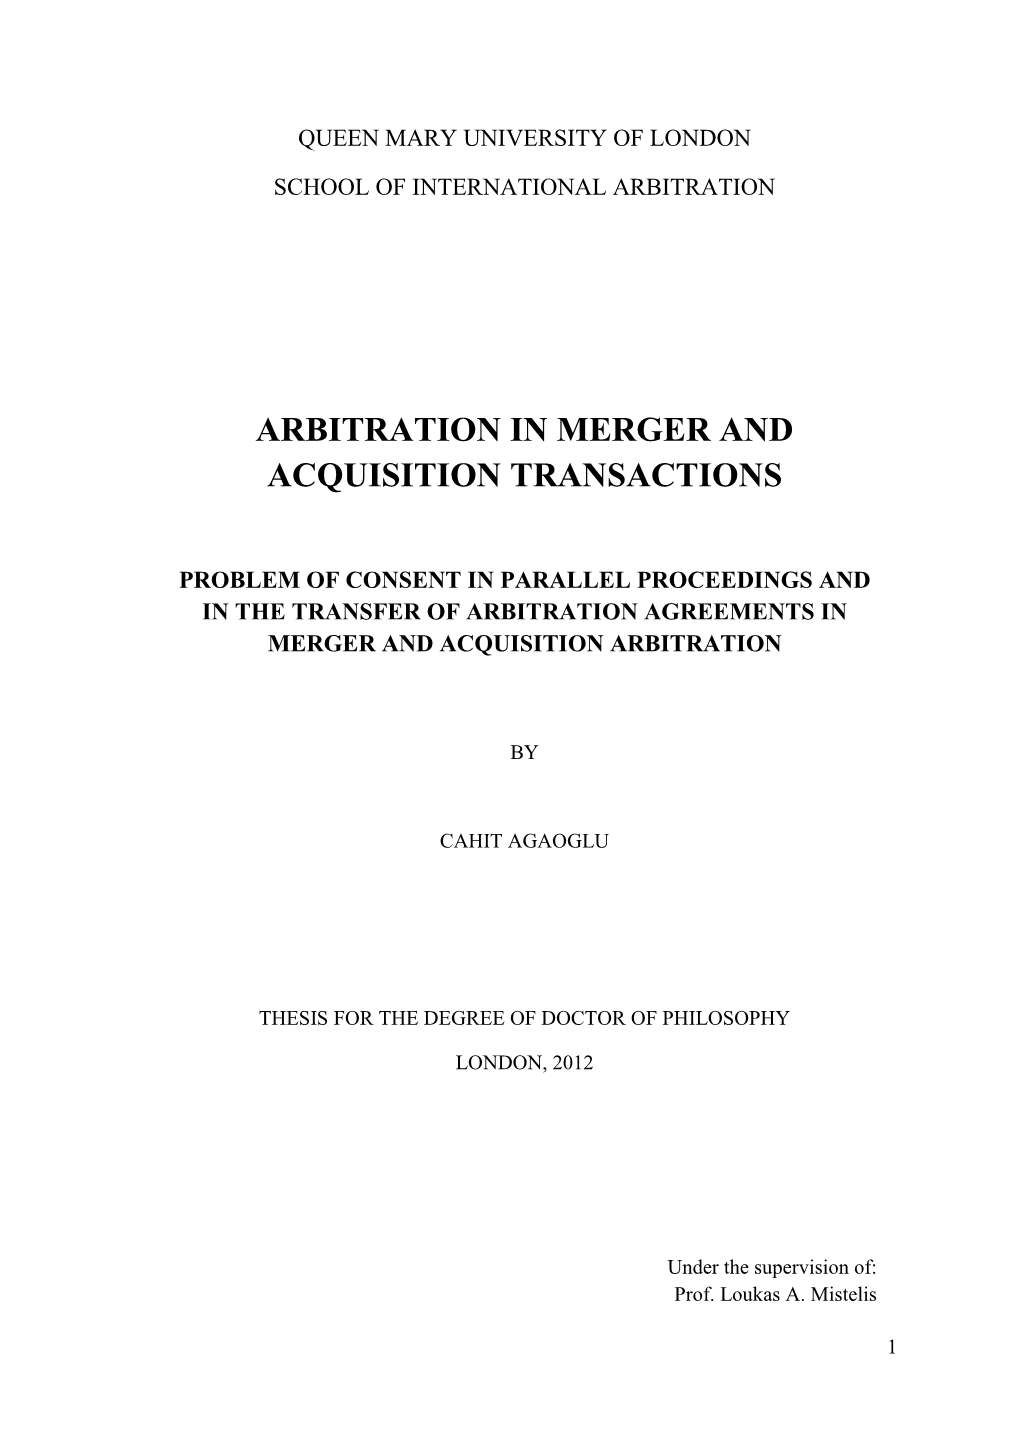 Arbitration in Merger and Acquisition Transactions